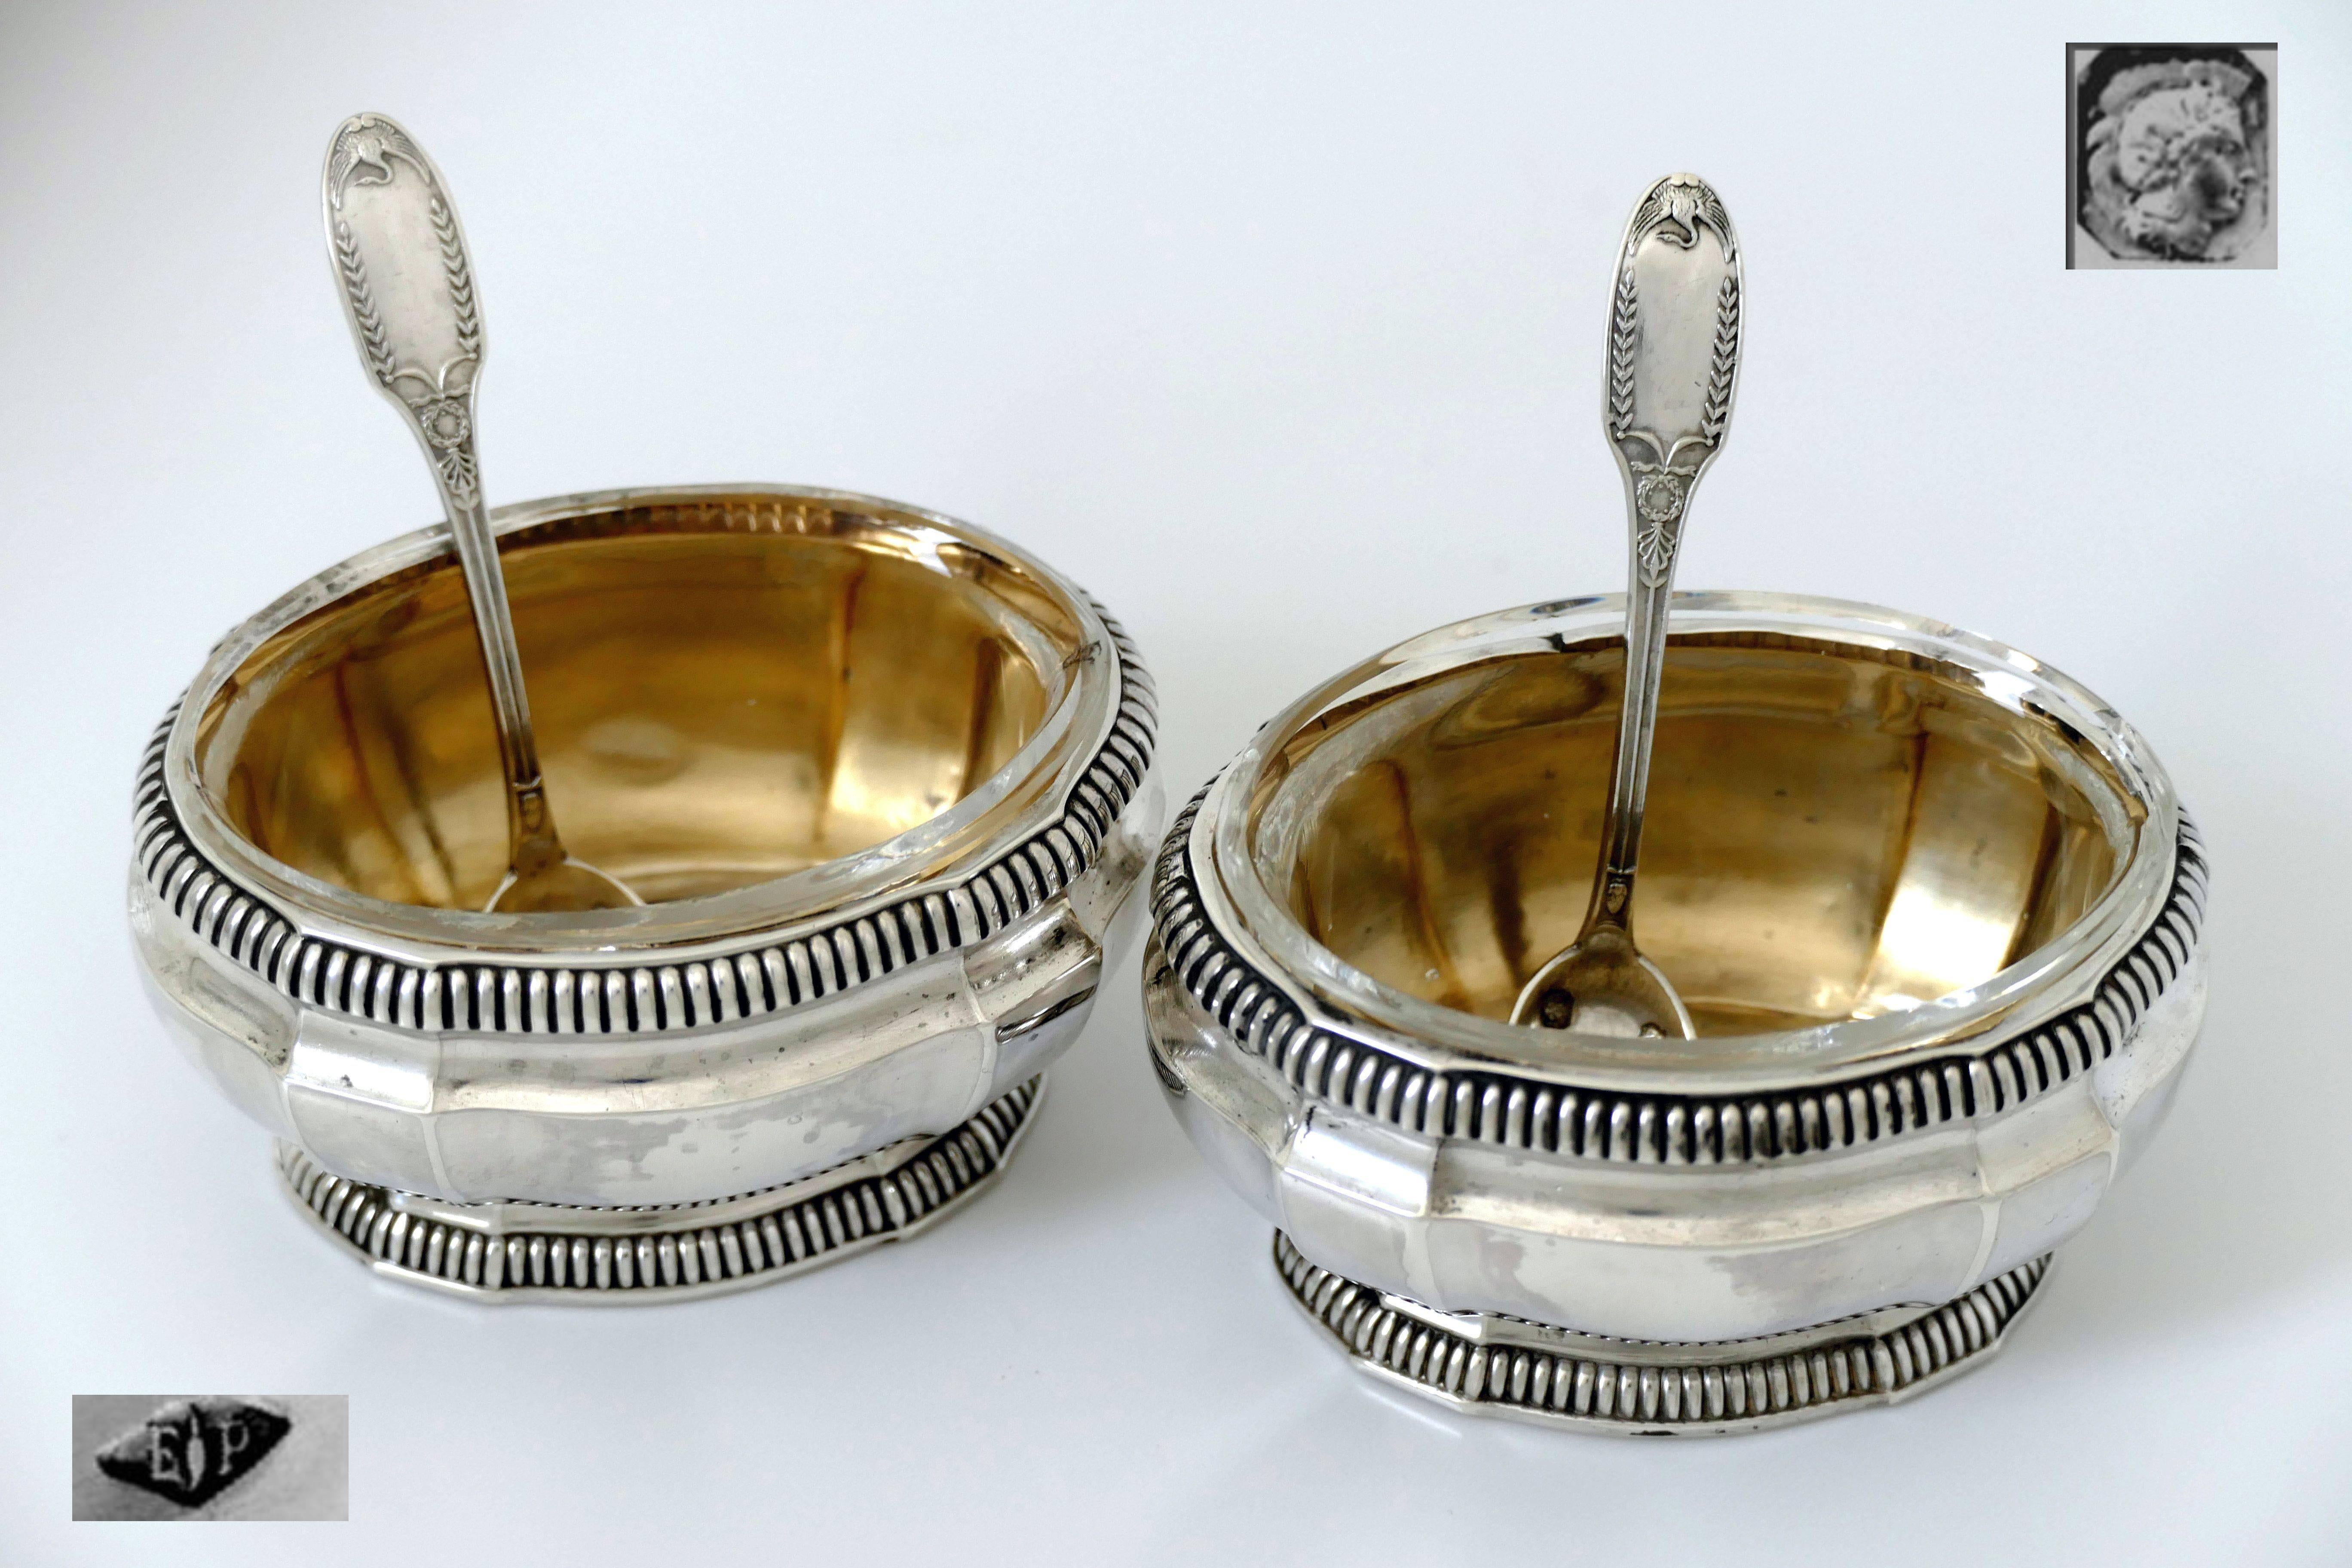 Head of Minerve 1st titre for 950/1000 French sterling silver vermeil guarantee. The quality of the gold used to recover sterling silver is a minimum of 750 mils (18-karat).

Fabulous antique French sterling silver salt cellars pair with his